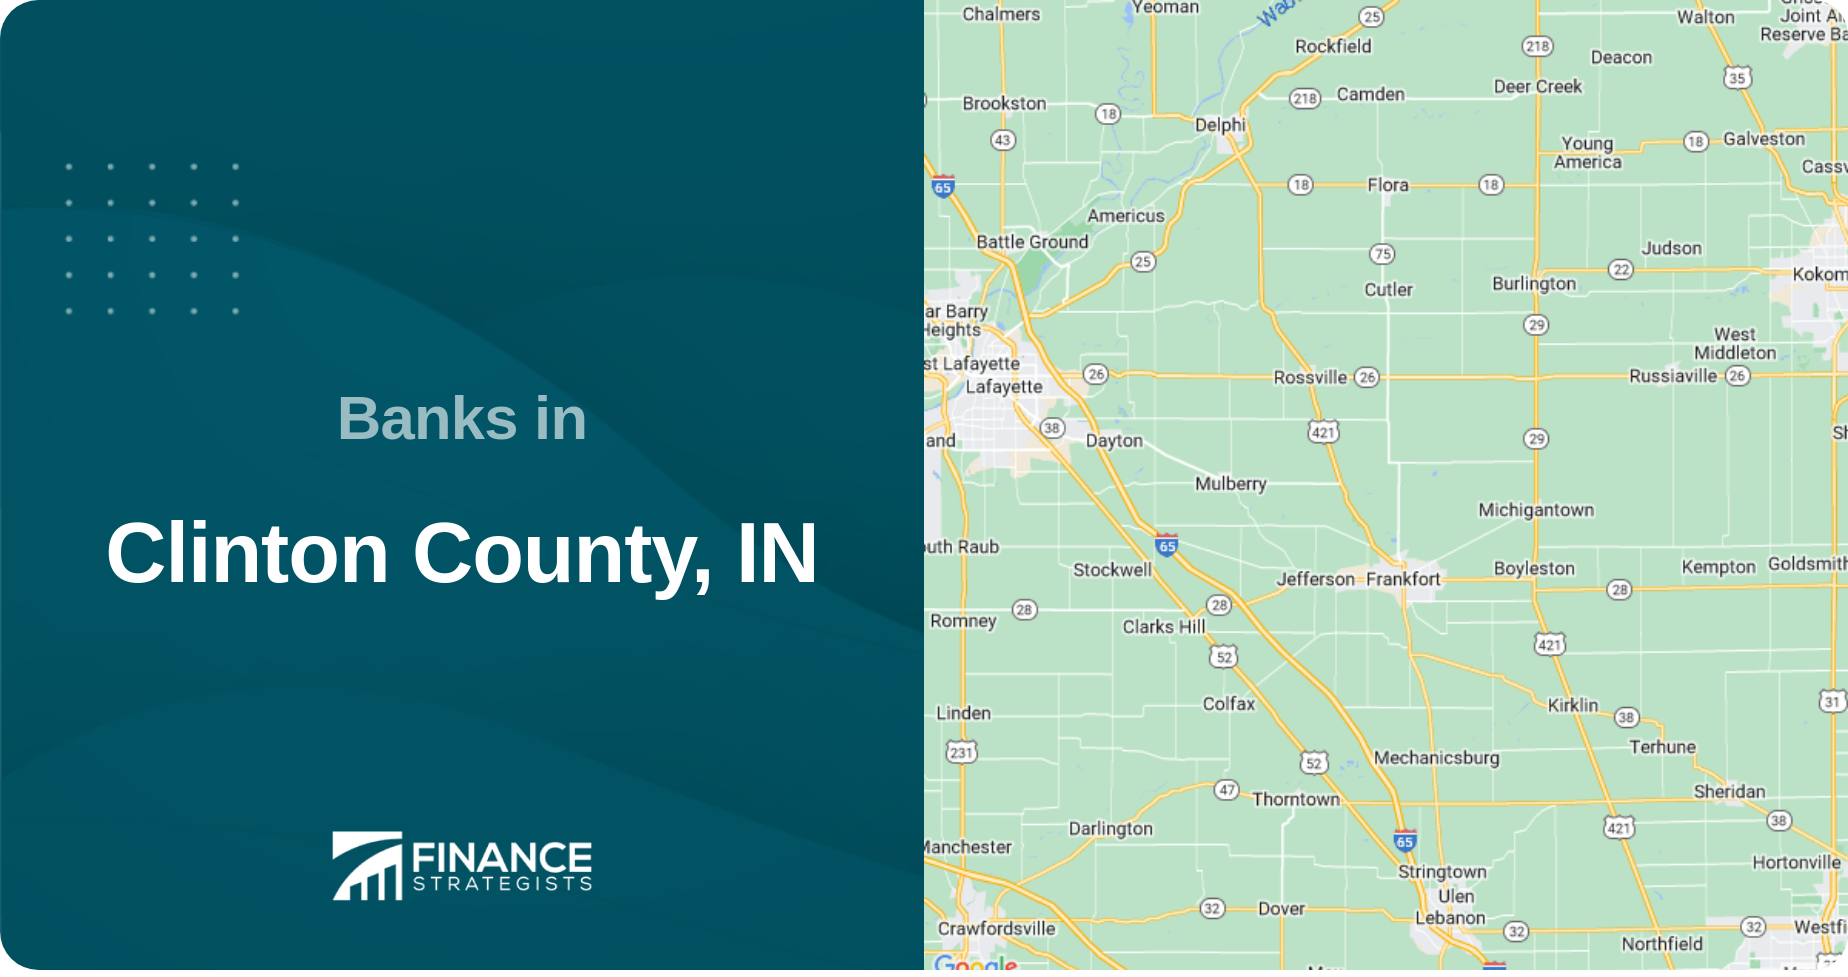 Banks in Clinton County, IN